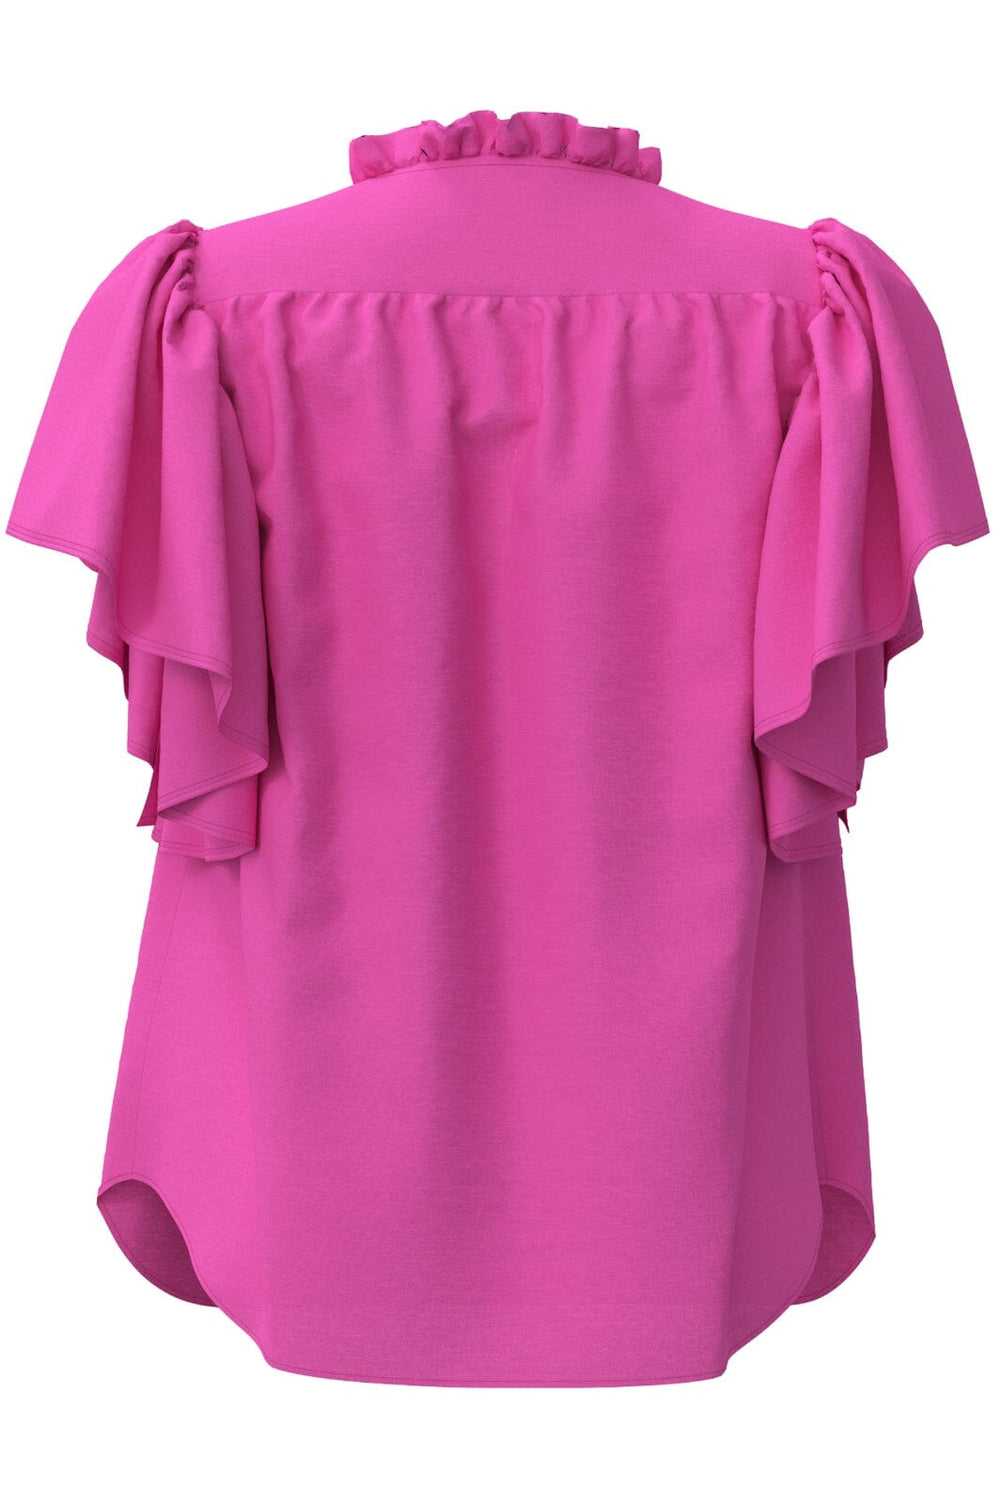 Forudbestilling - Co´couture - Heracc Ss Frill Top 35703 - 330 Pink Toppe 